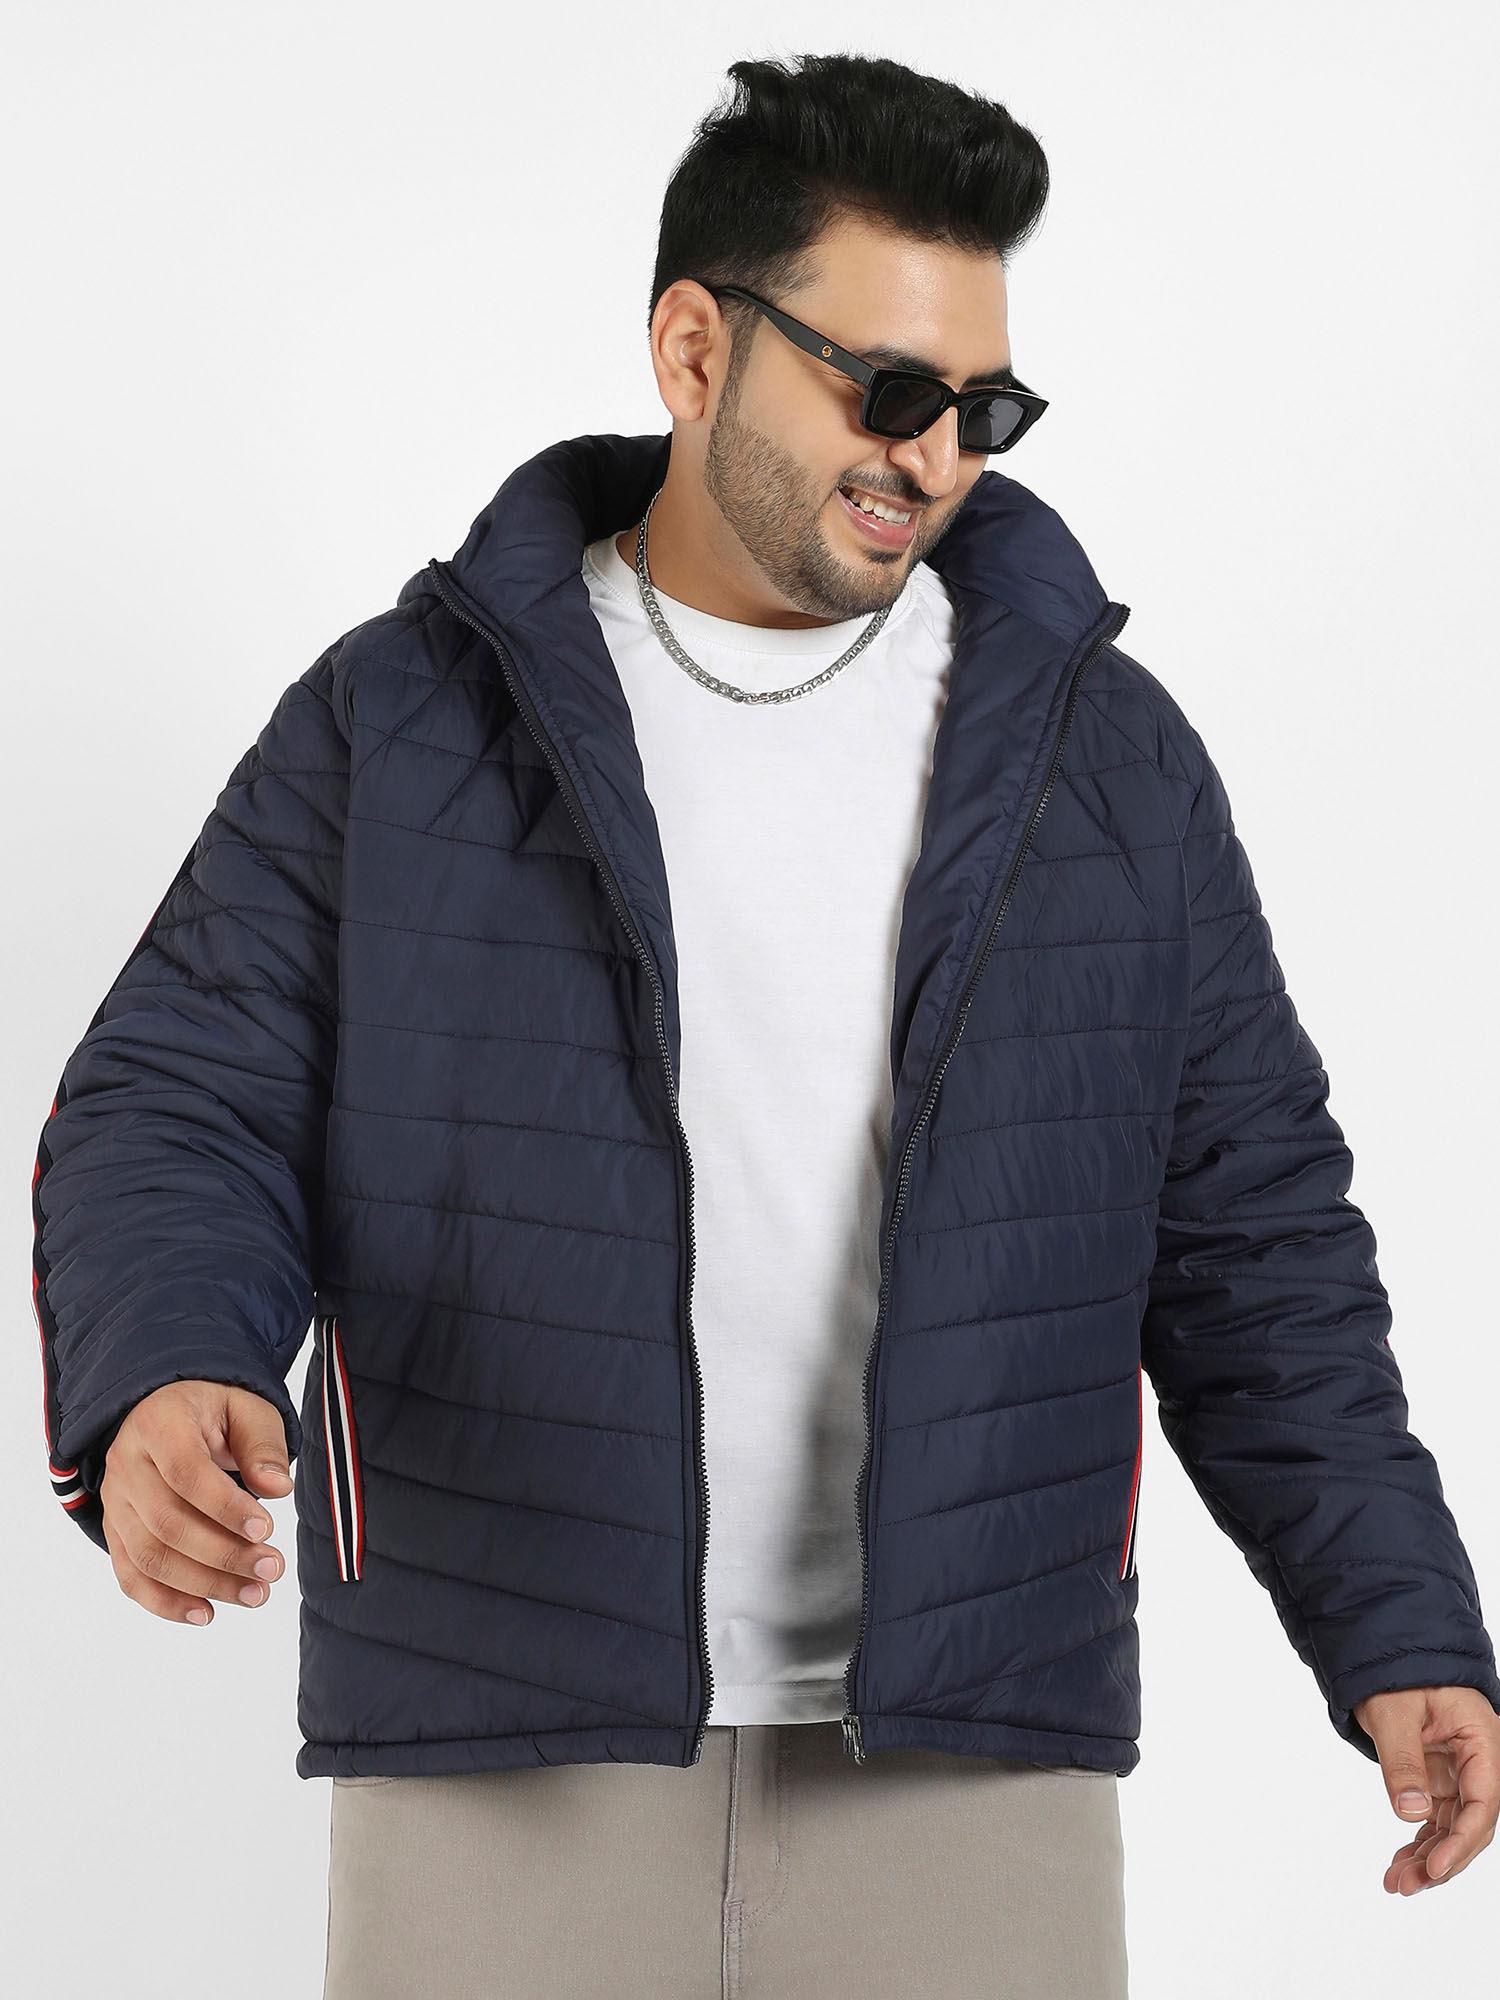 men-navy-blue-puffer-jacket-with-contrast-striped-sleeve